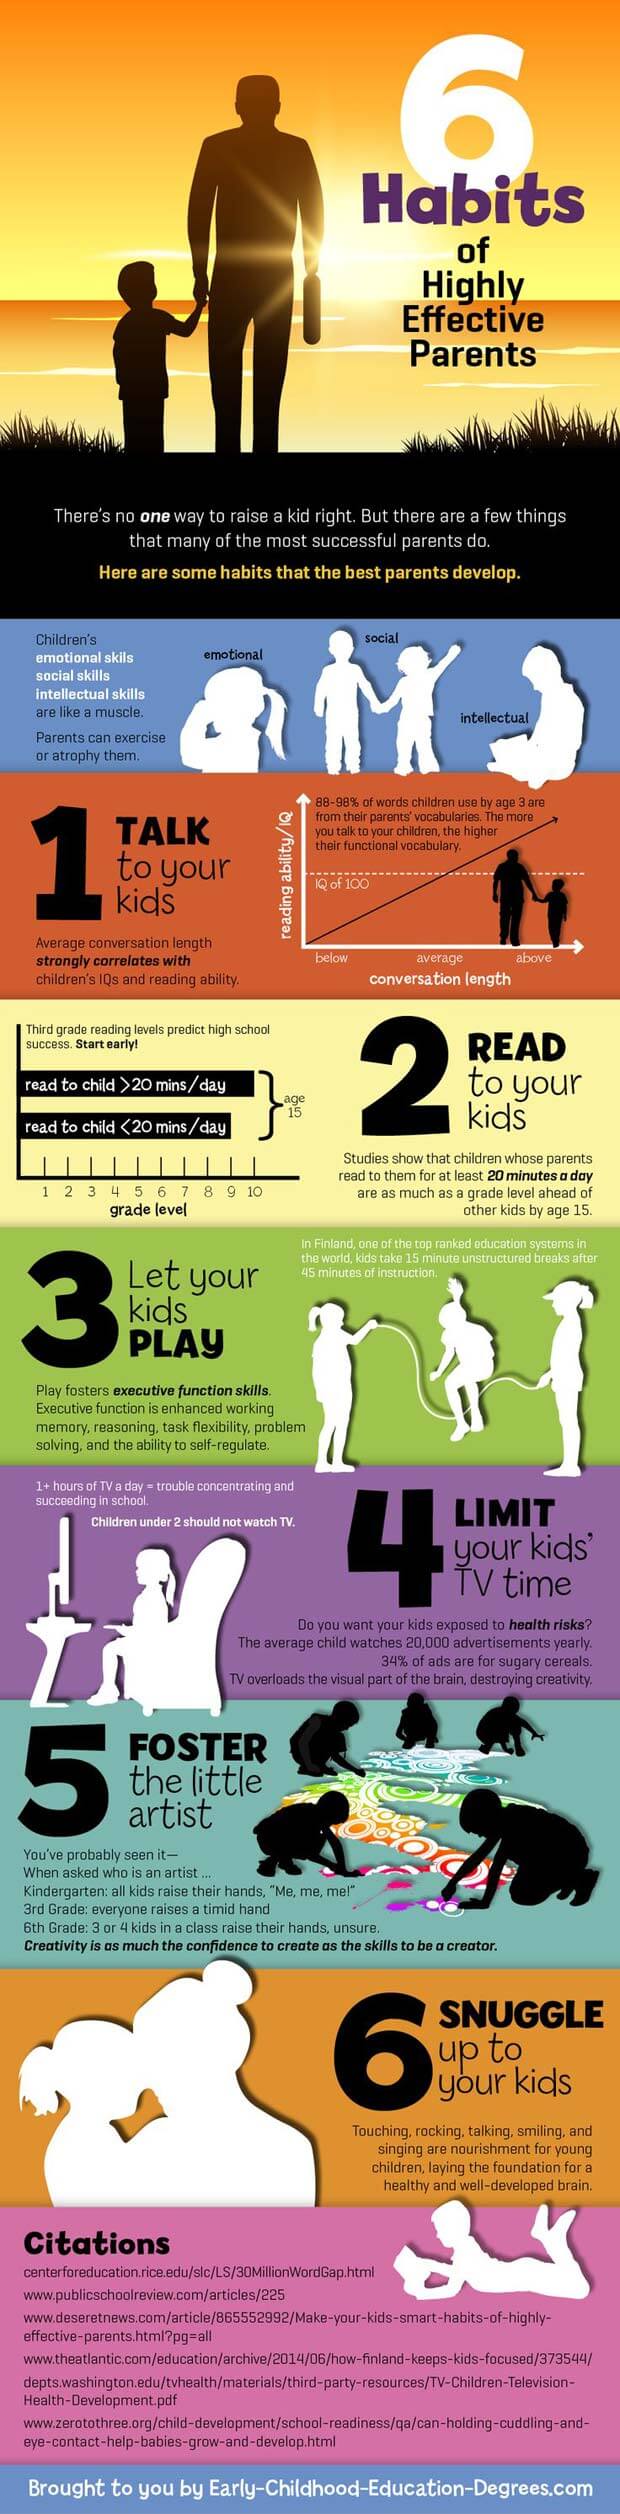 Infographic describing the tips for effective parenting.